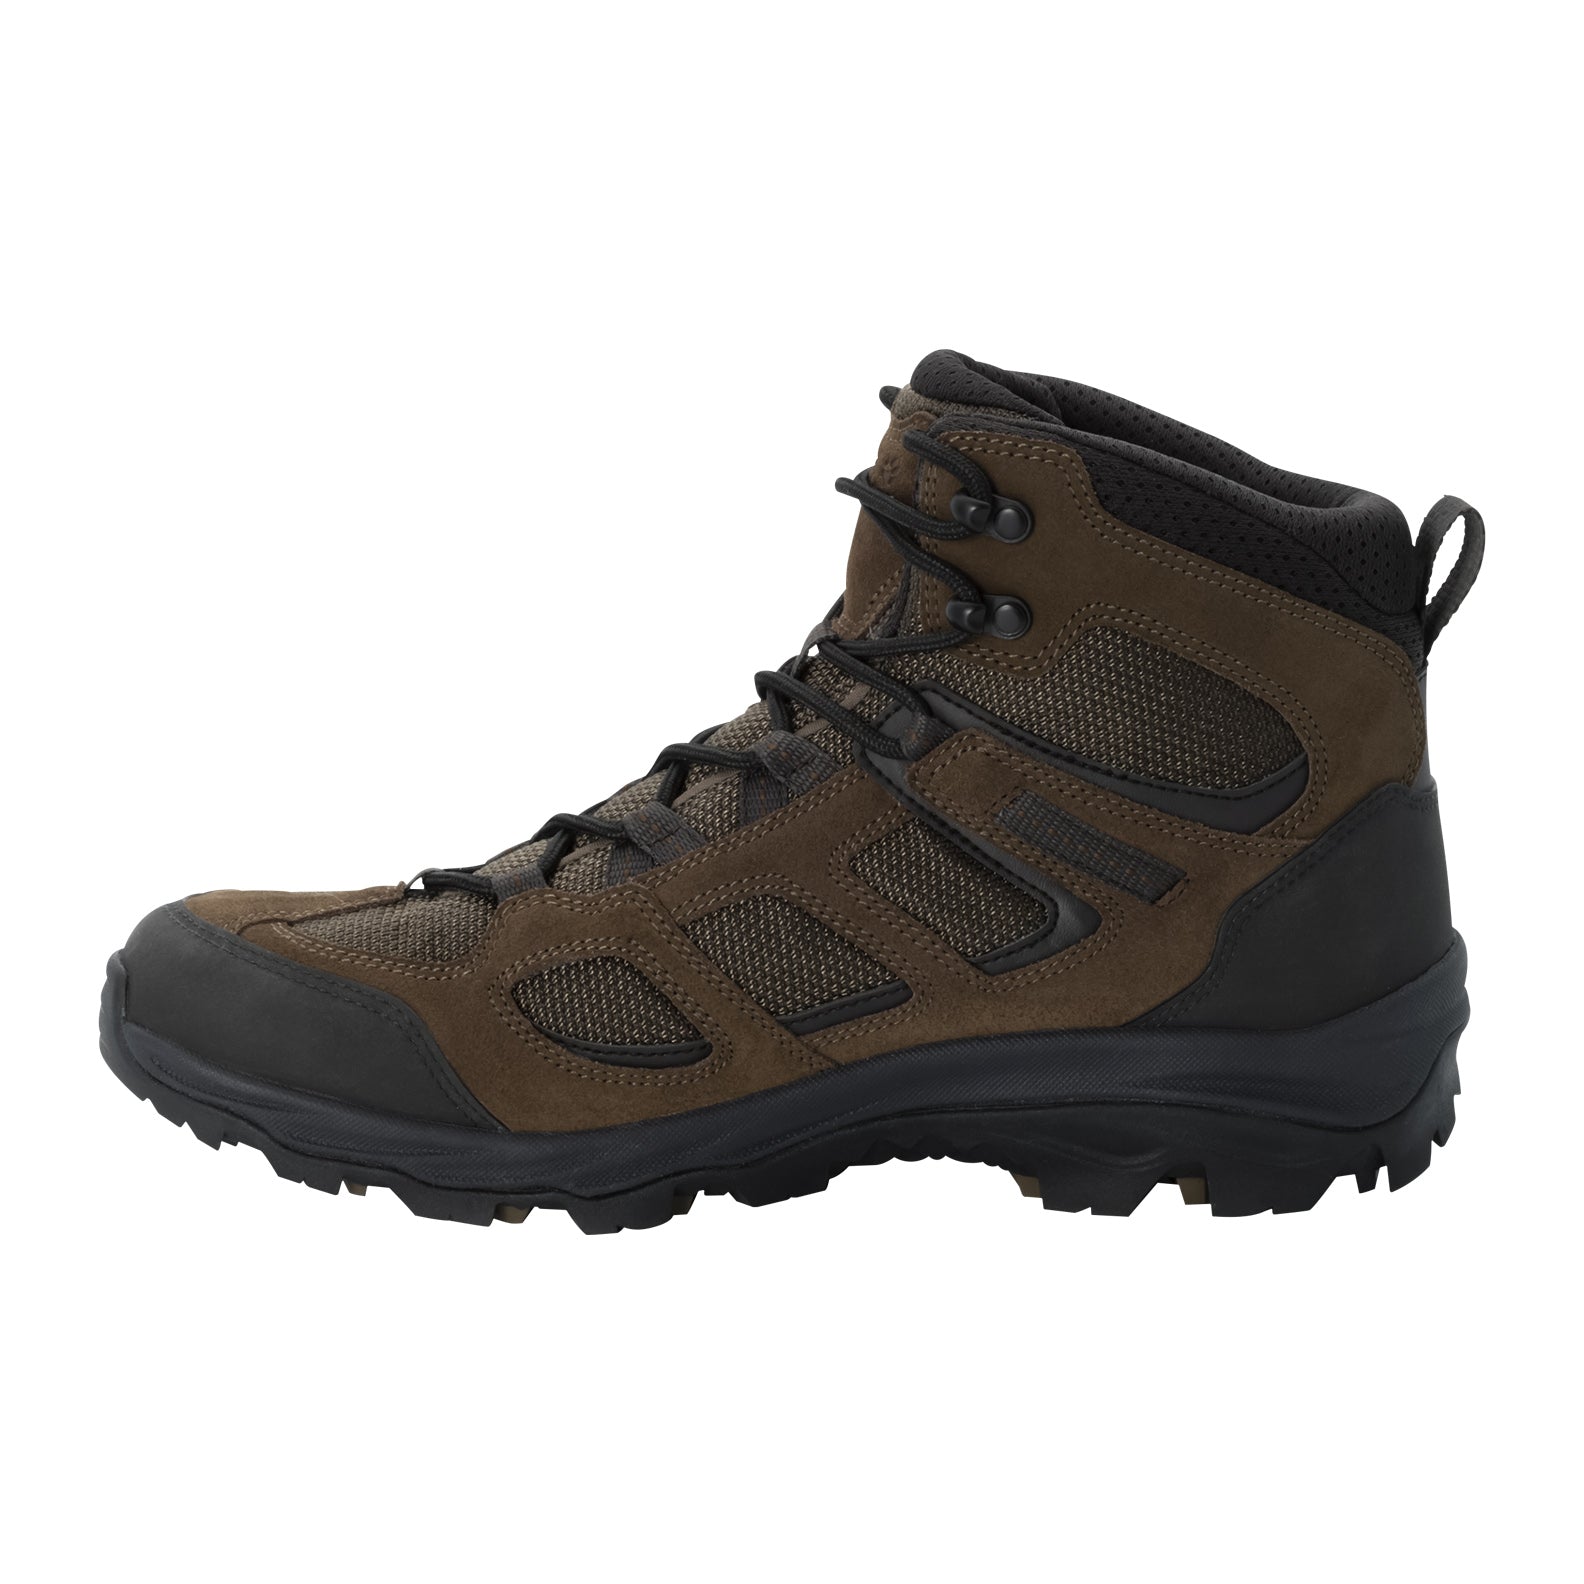 Jack Wolfskin Mens Vojo 3 Texapore Mid Hiking Boots